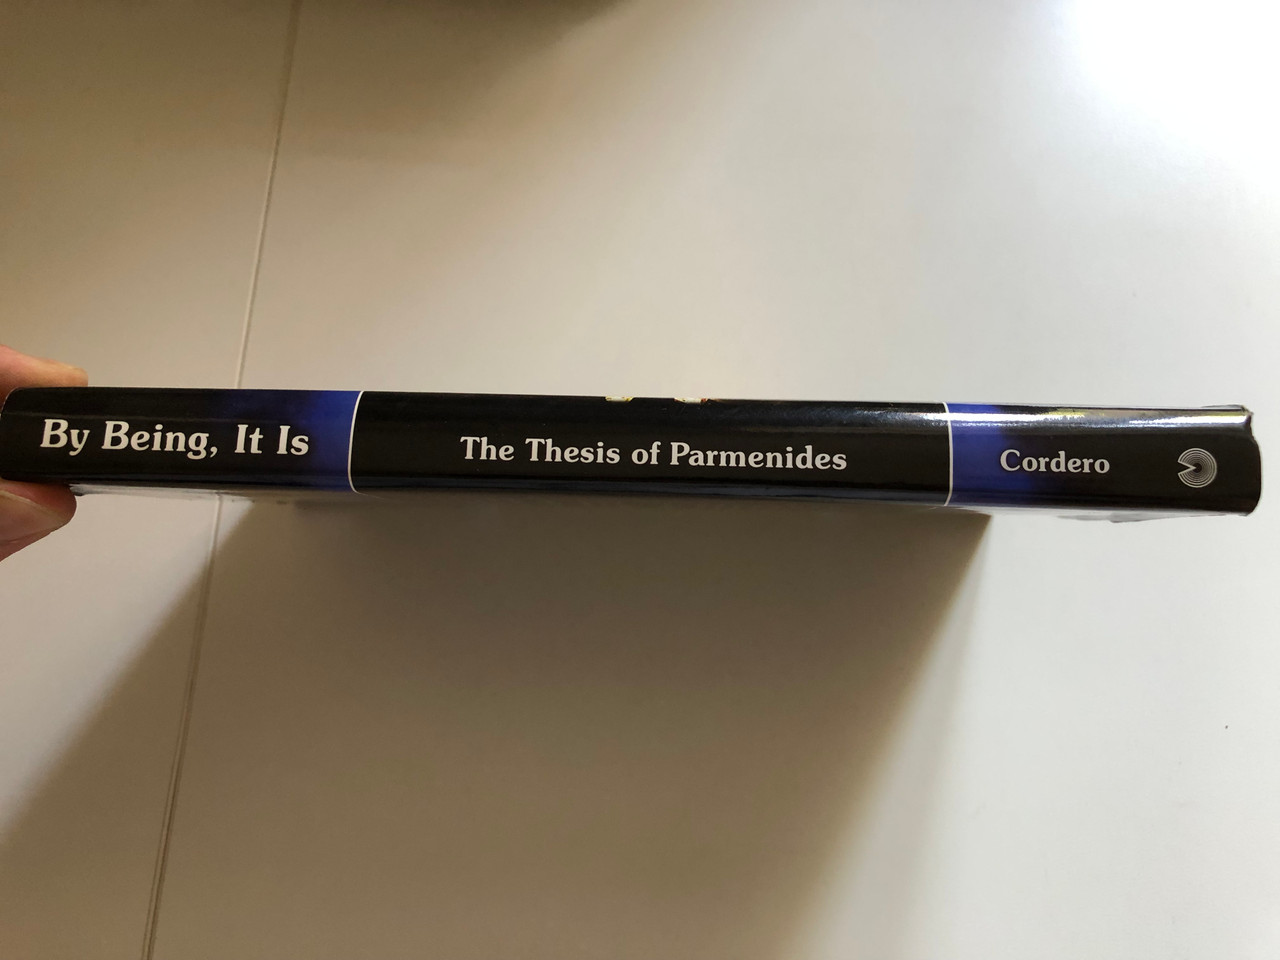 By_Being_It_Is_The_Thesis_of_Parmenides_by_Nestor-Luis_Cordero_In_By_Being_It_is_Nestor-Luis_Cordero_explores_the_richness_of_this_Parmenidean_thesis_Publisher_P_3__11585.1691243968.1280.1280.JPG (1280×960)